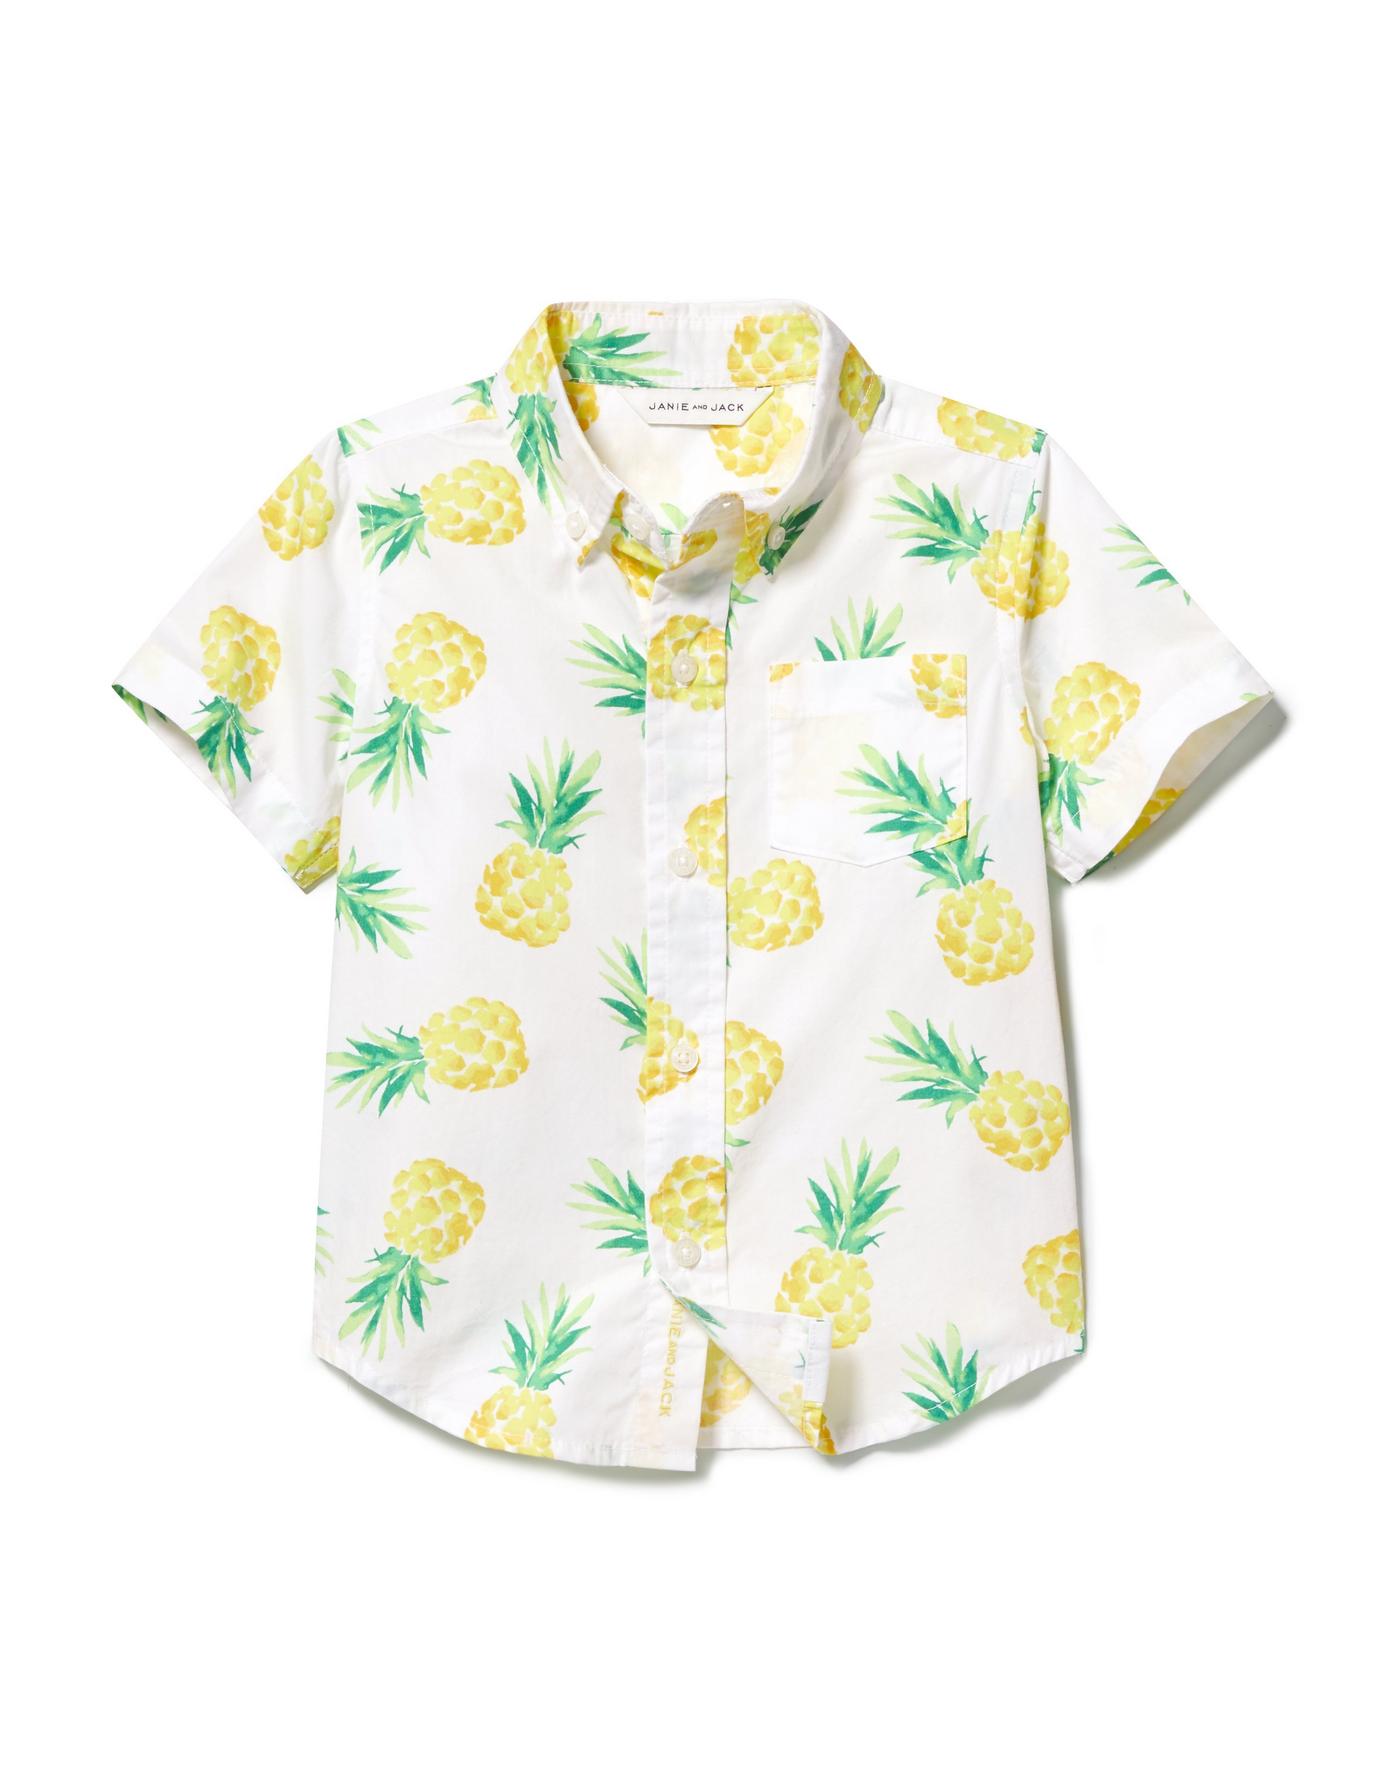 sibling matches for summer, pineapple button up